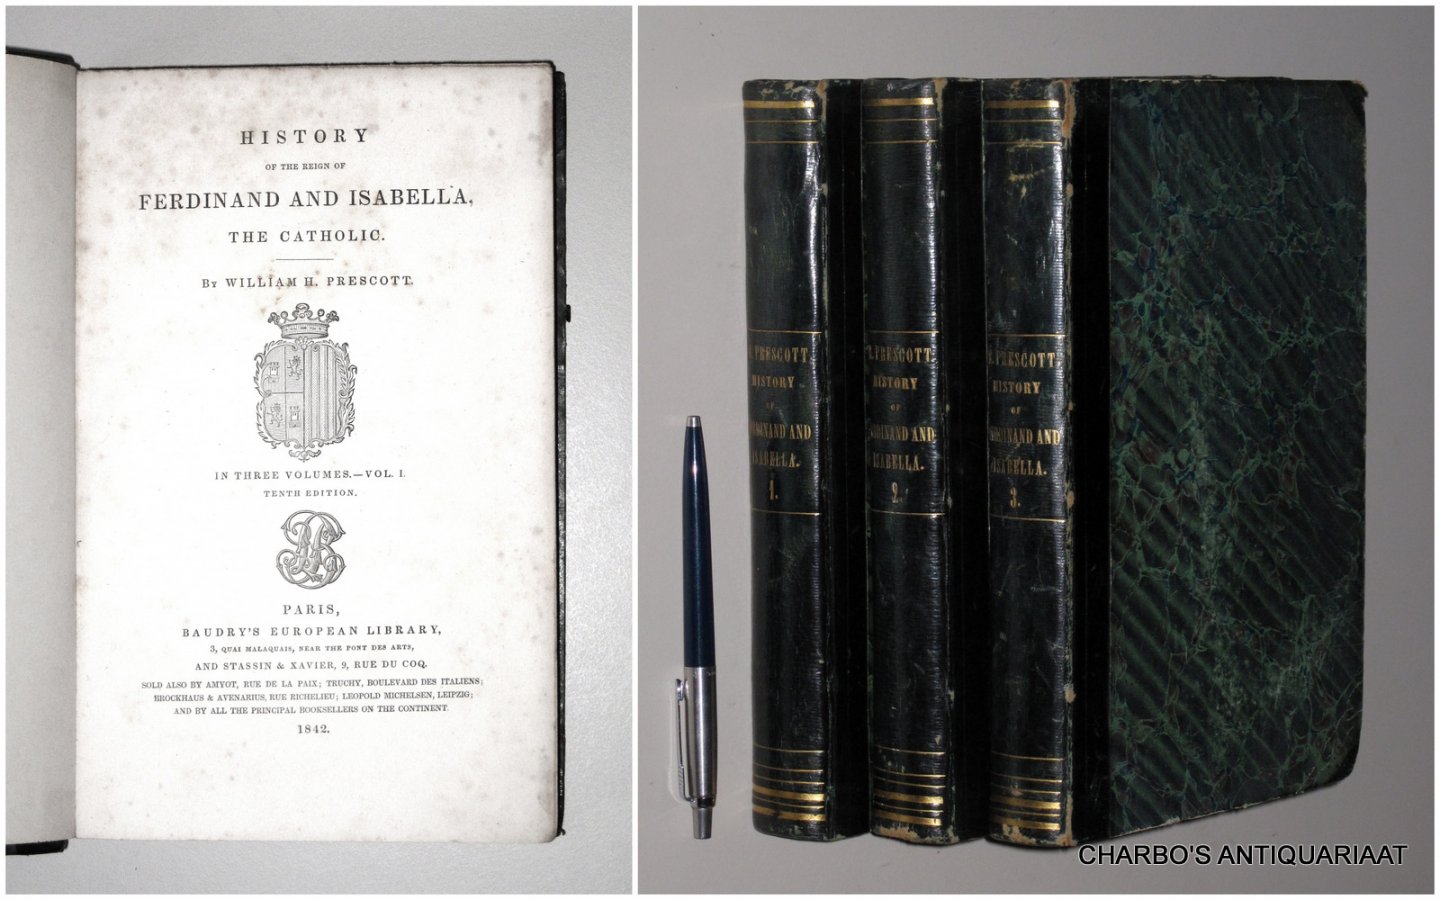 PRESCOTT, WILLIAM H., - History of the reign of Ferdinand and Isabella, the Catholic. (3 vol. set).